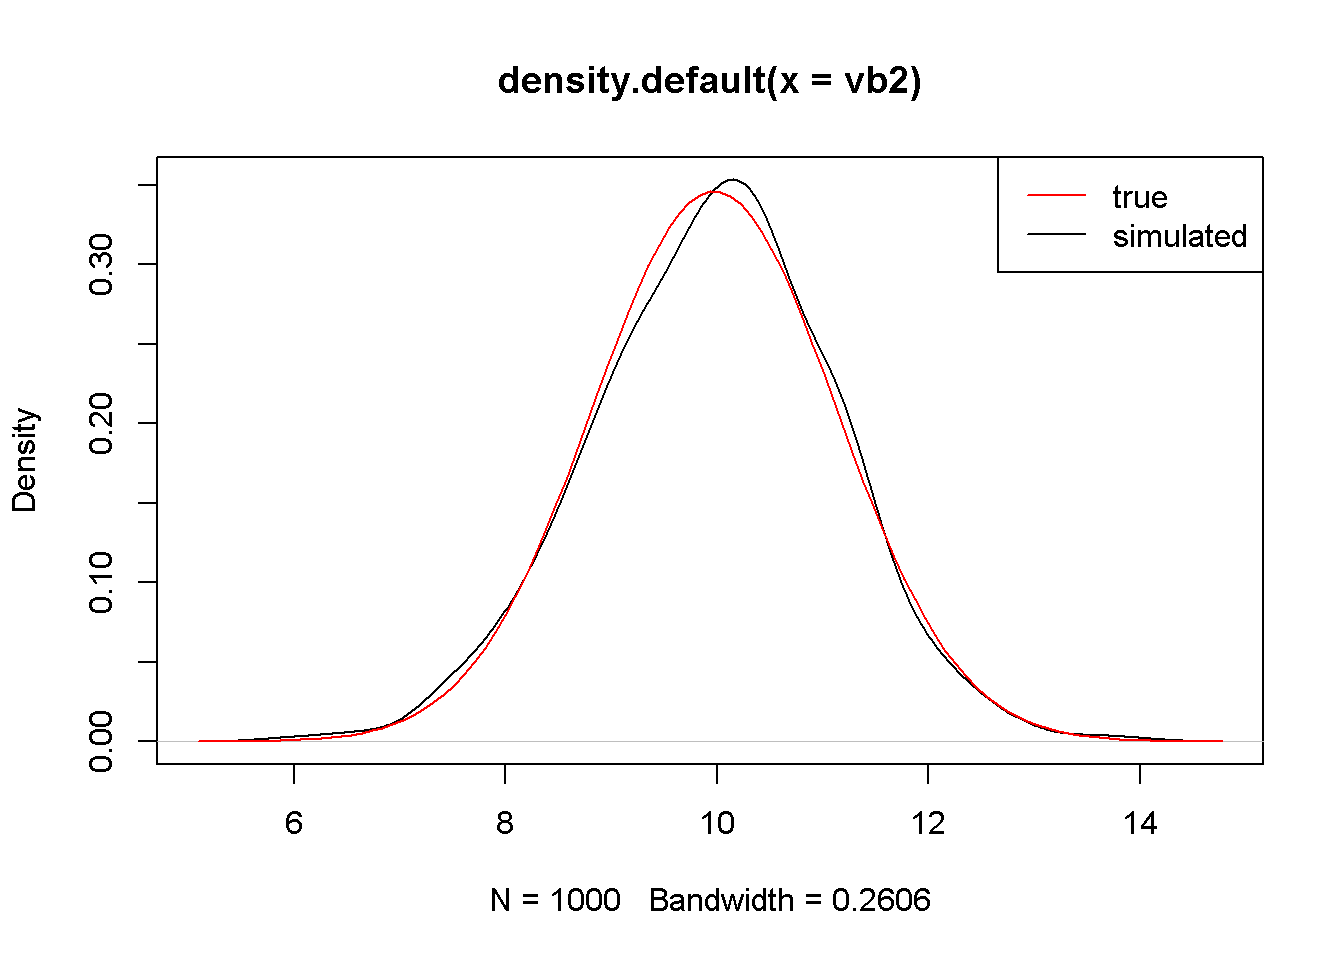 The simulated and theoretical distributions of $b_{2}$